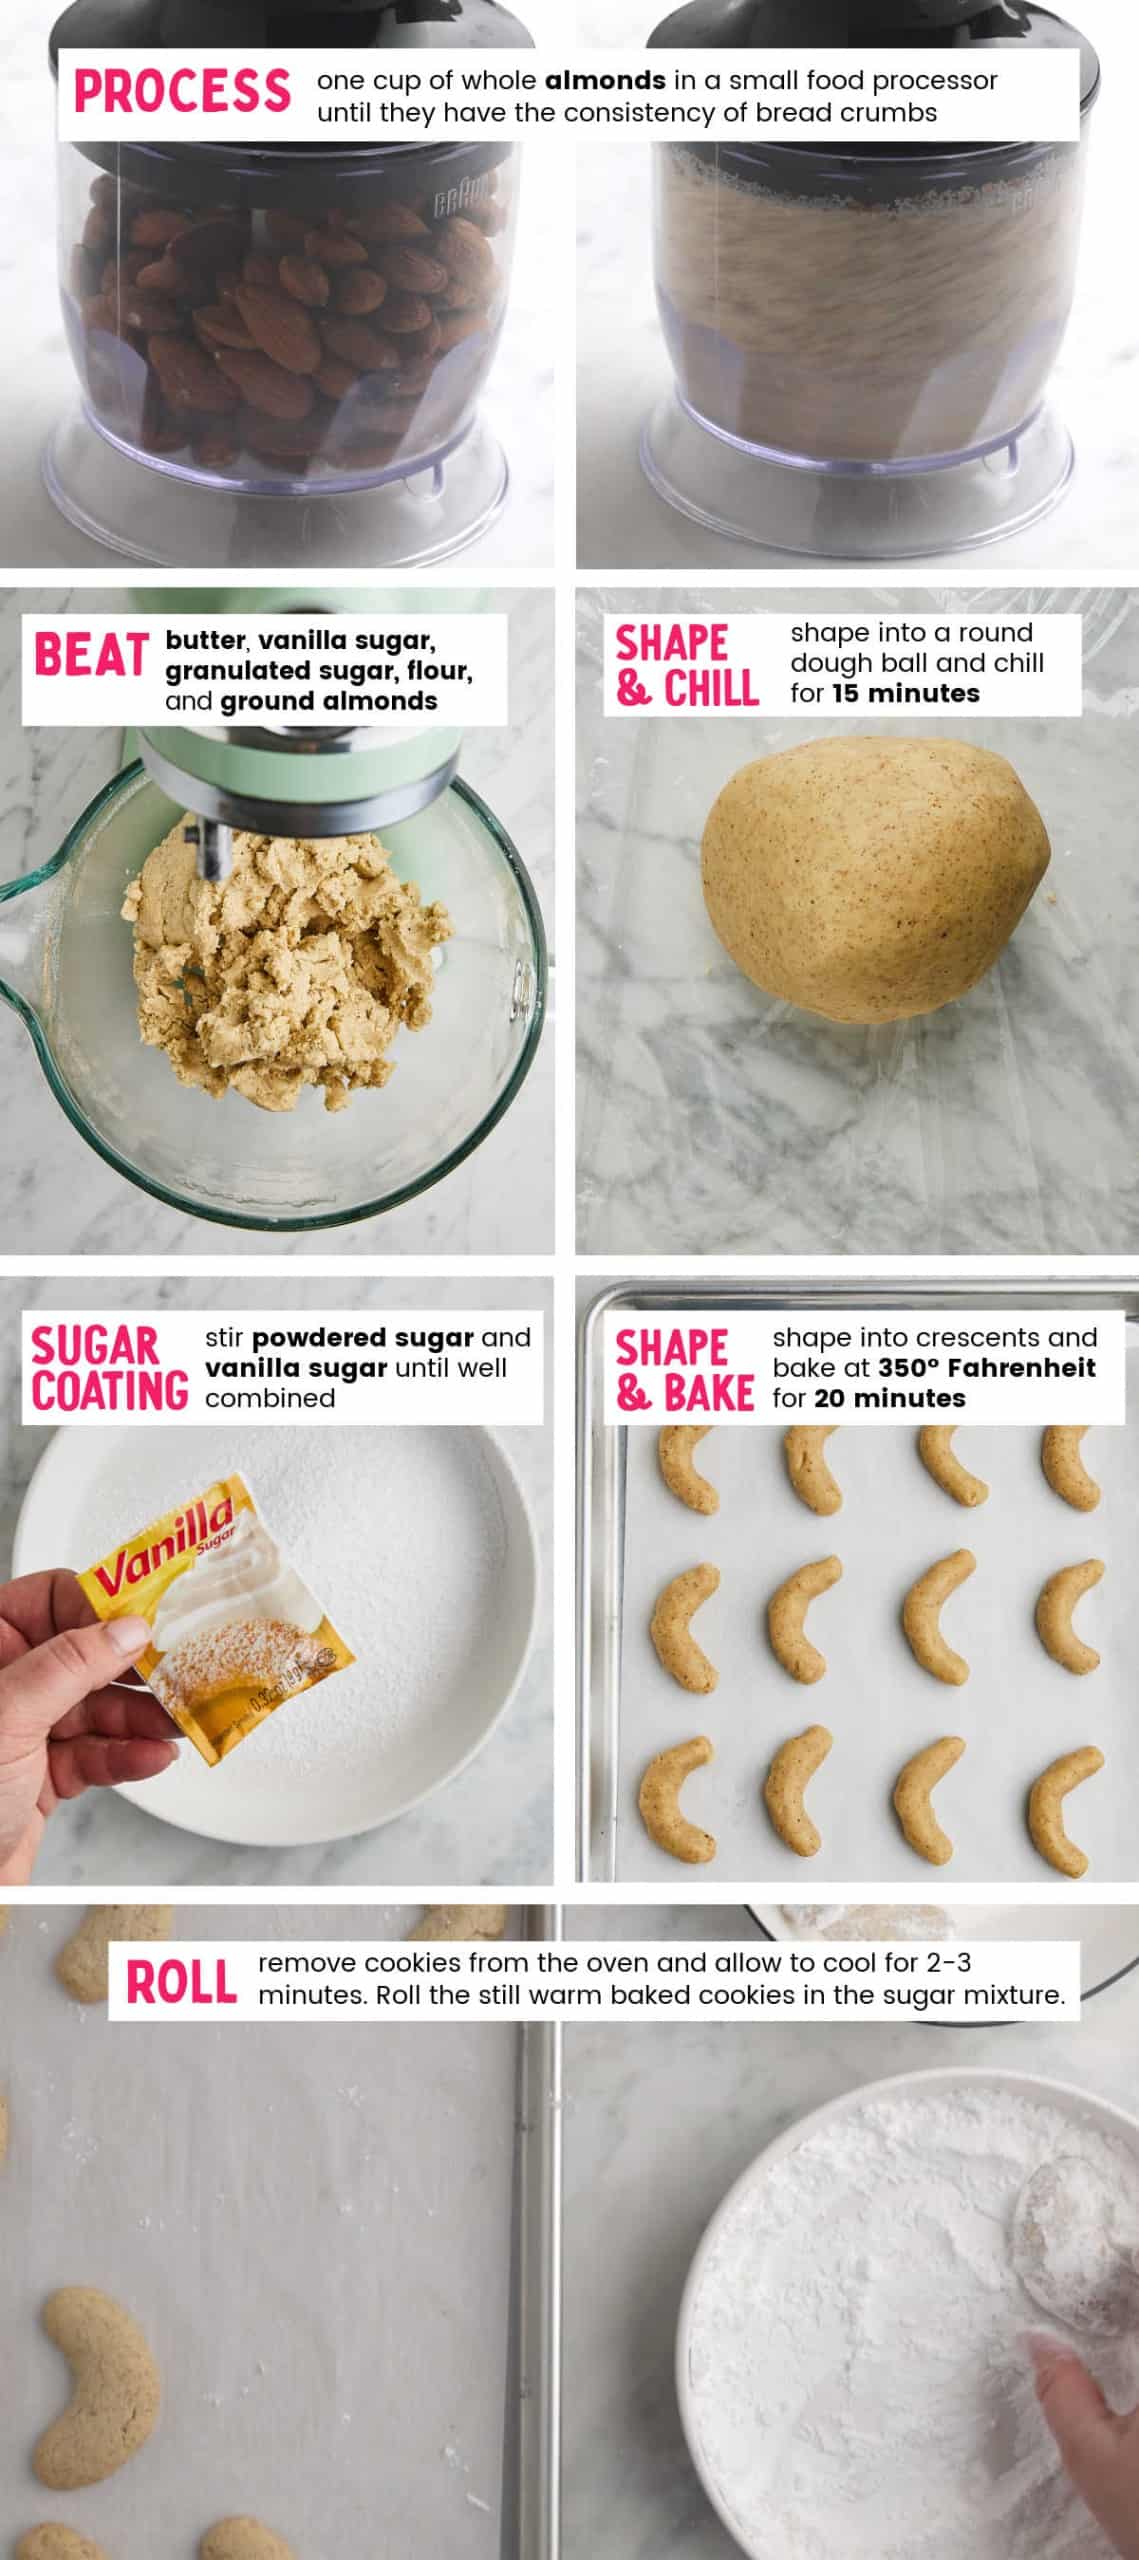 Collage of steps showing how to make Vanillekipferl Cookies.